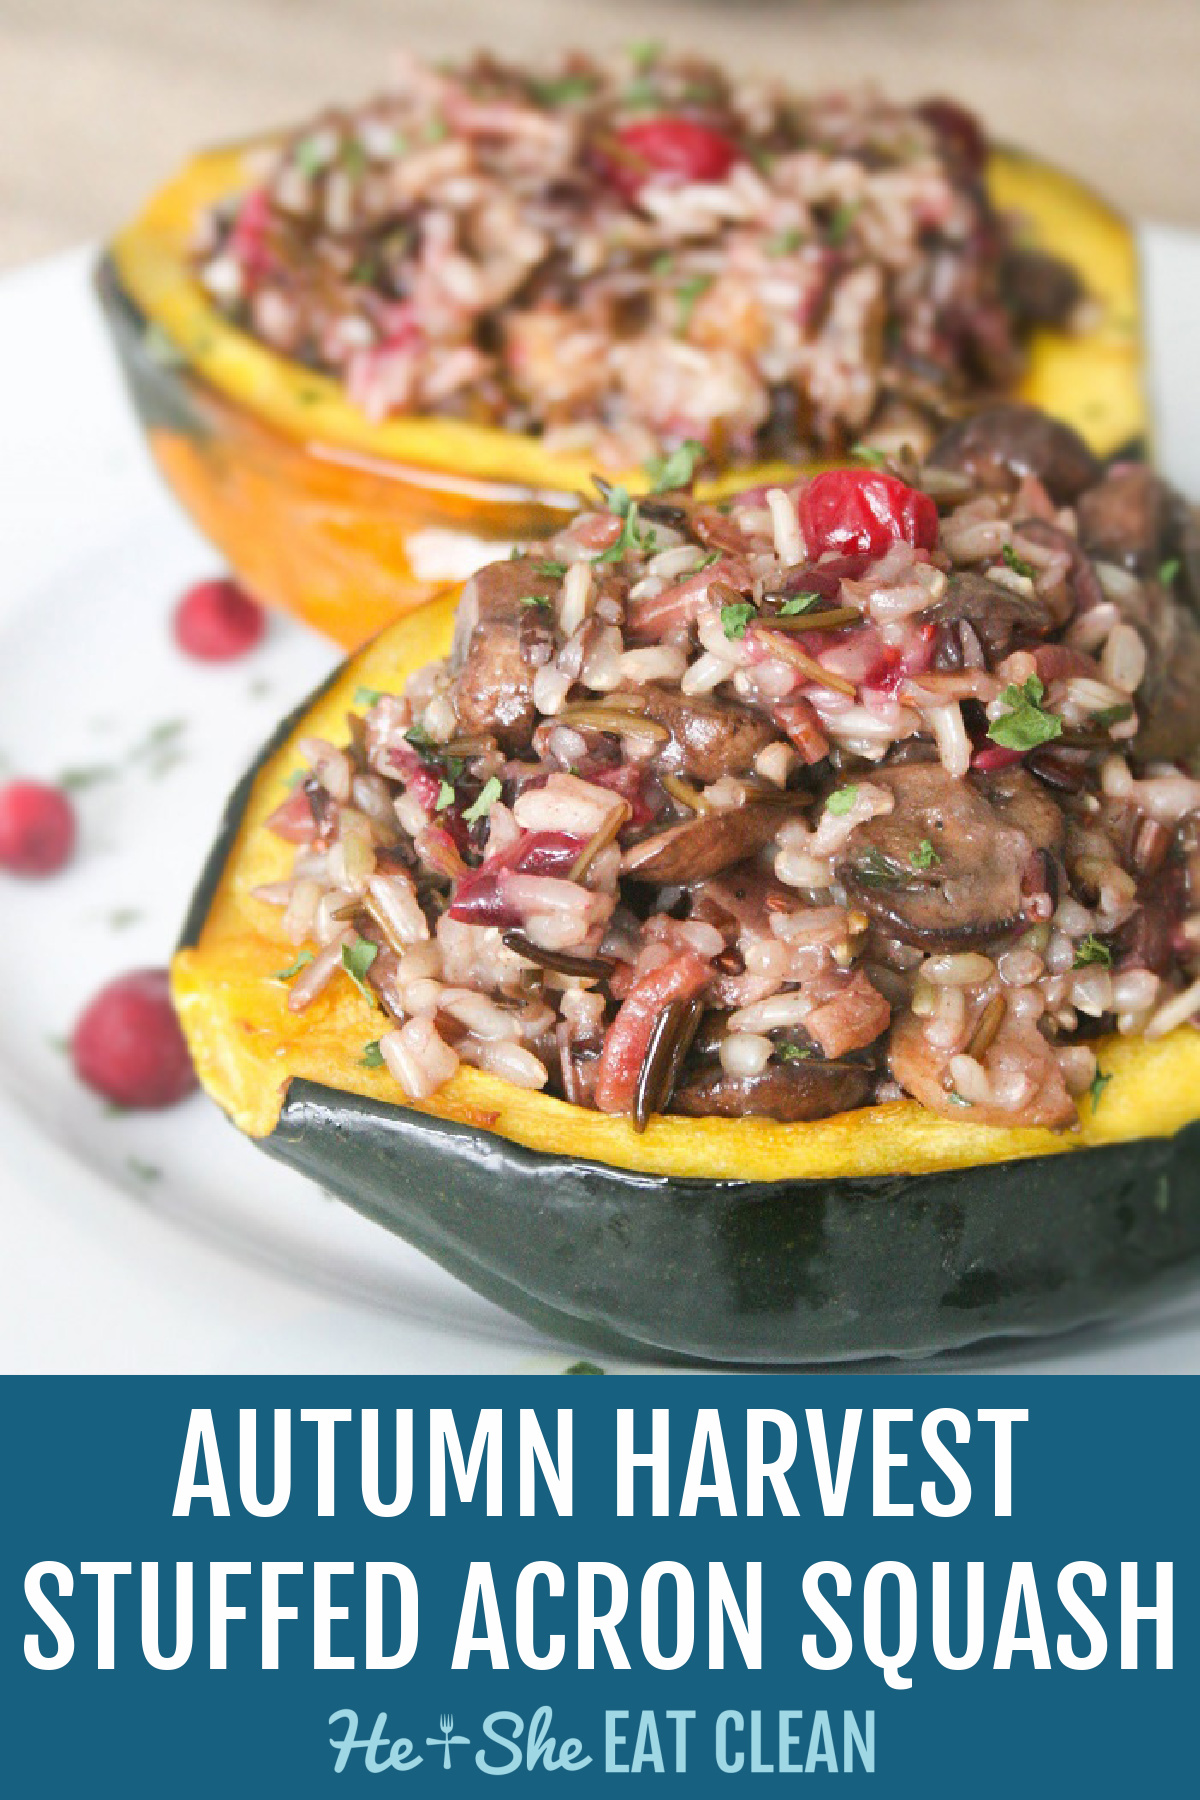 cut squash stuffed with rice and topped with cranberries